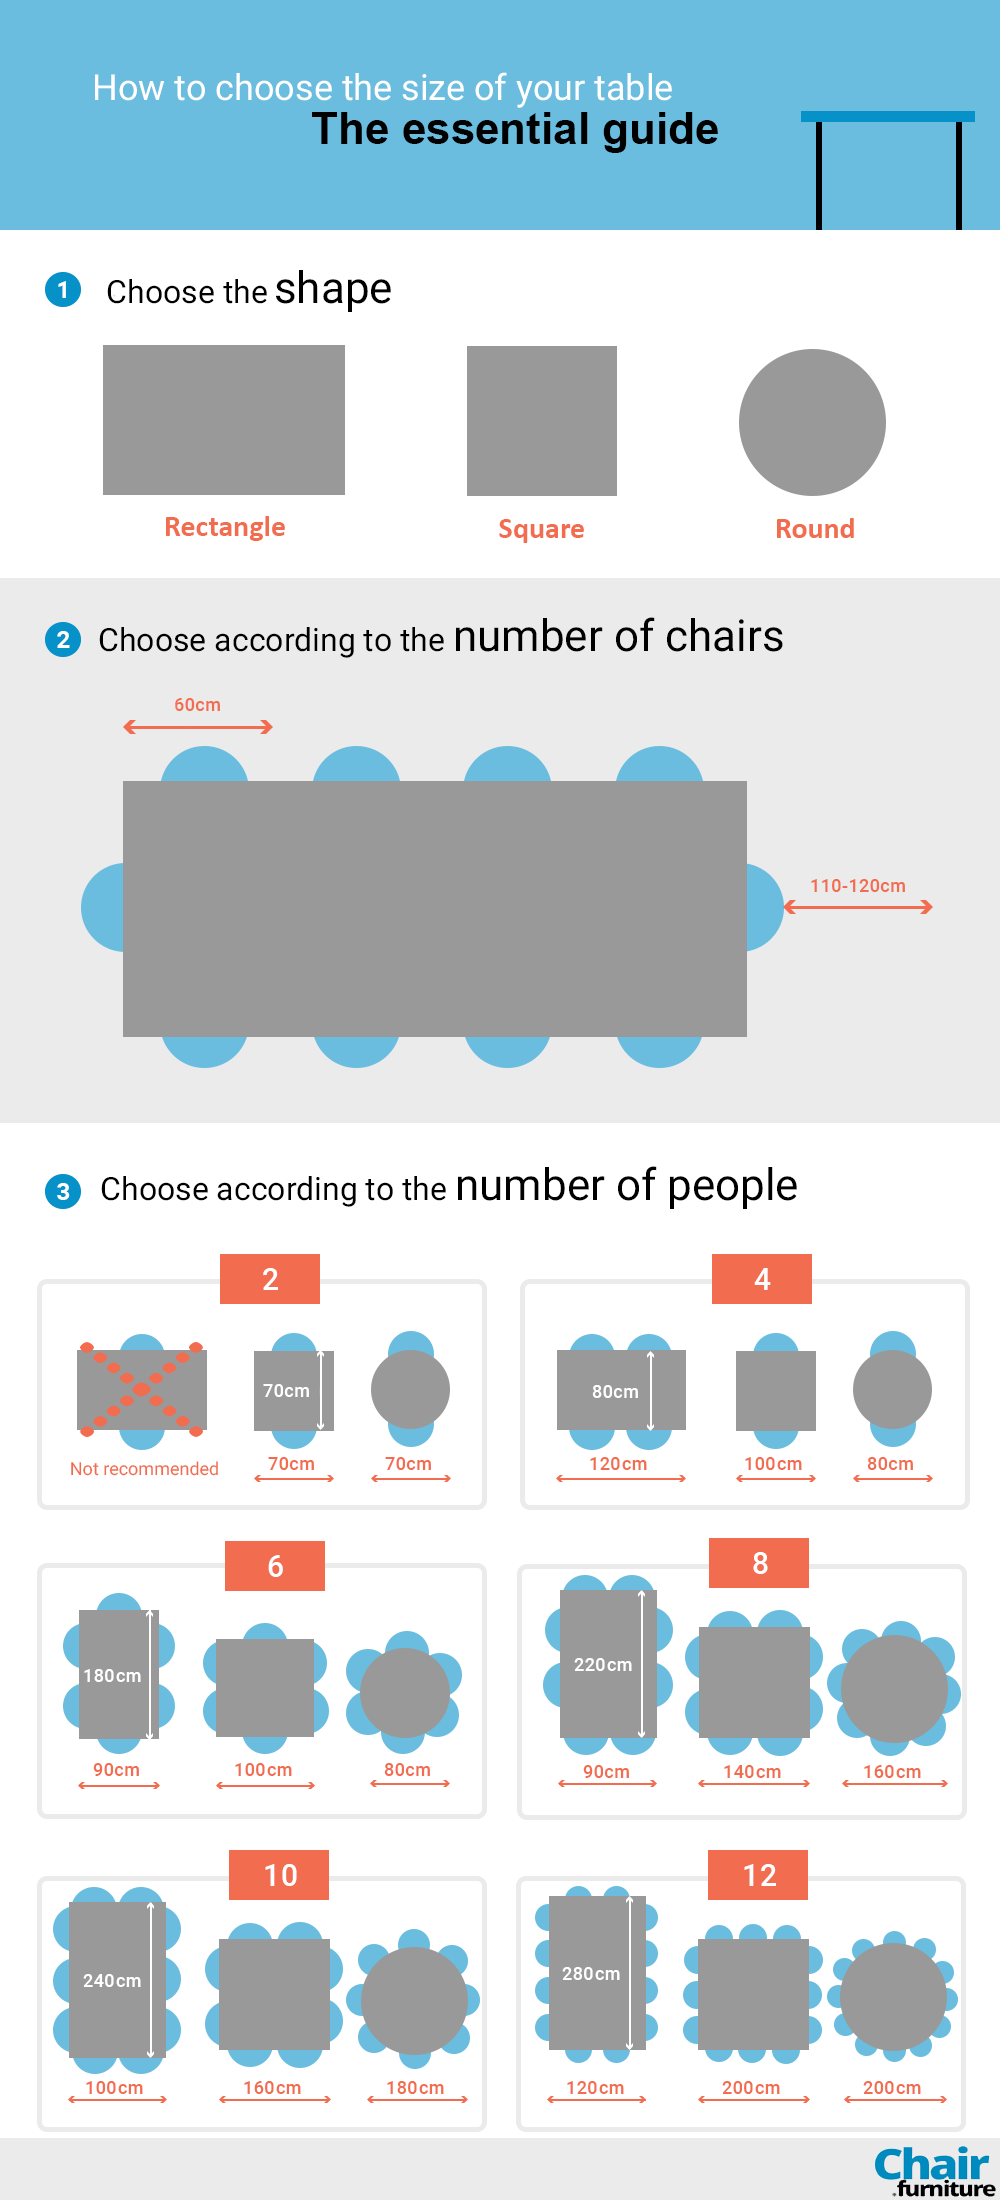 How To Choose The Size Of A Table, How Long Should A Dining Room Table Be To Seat 120